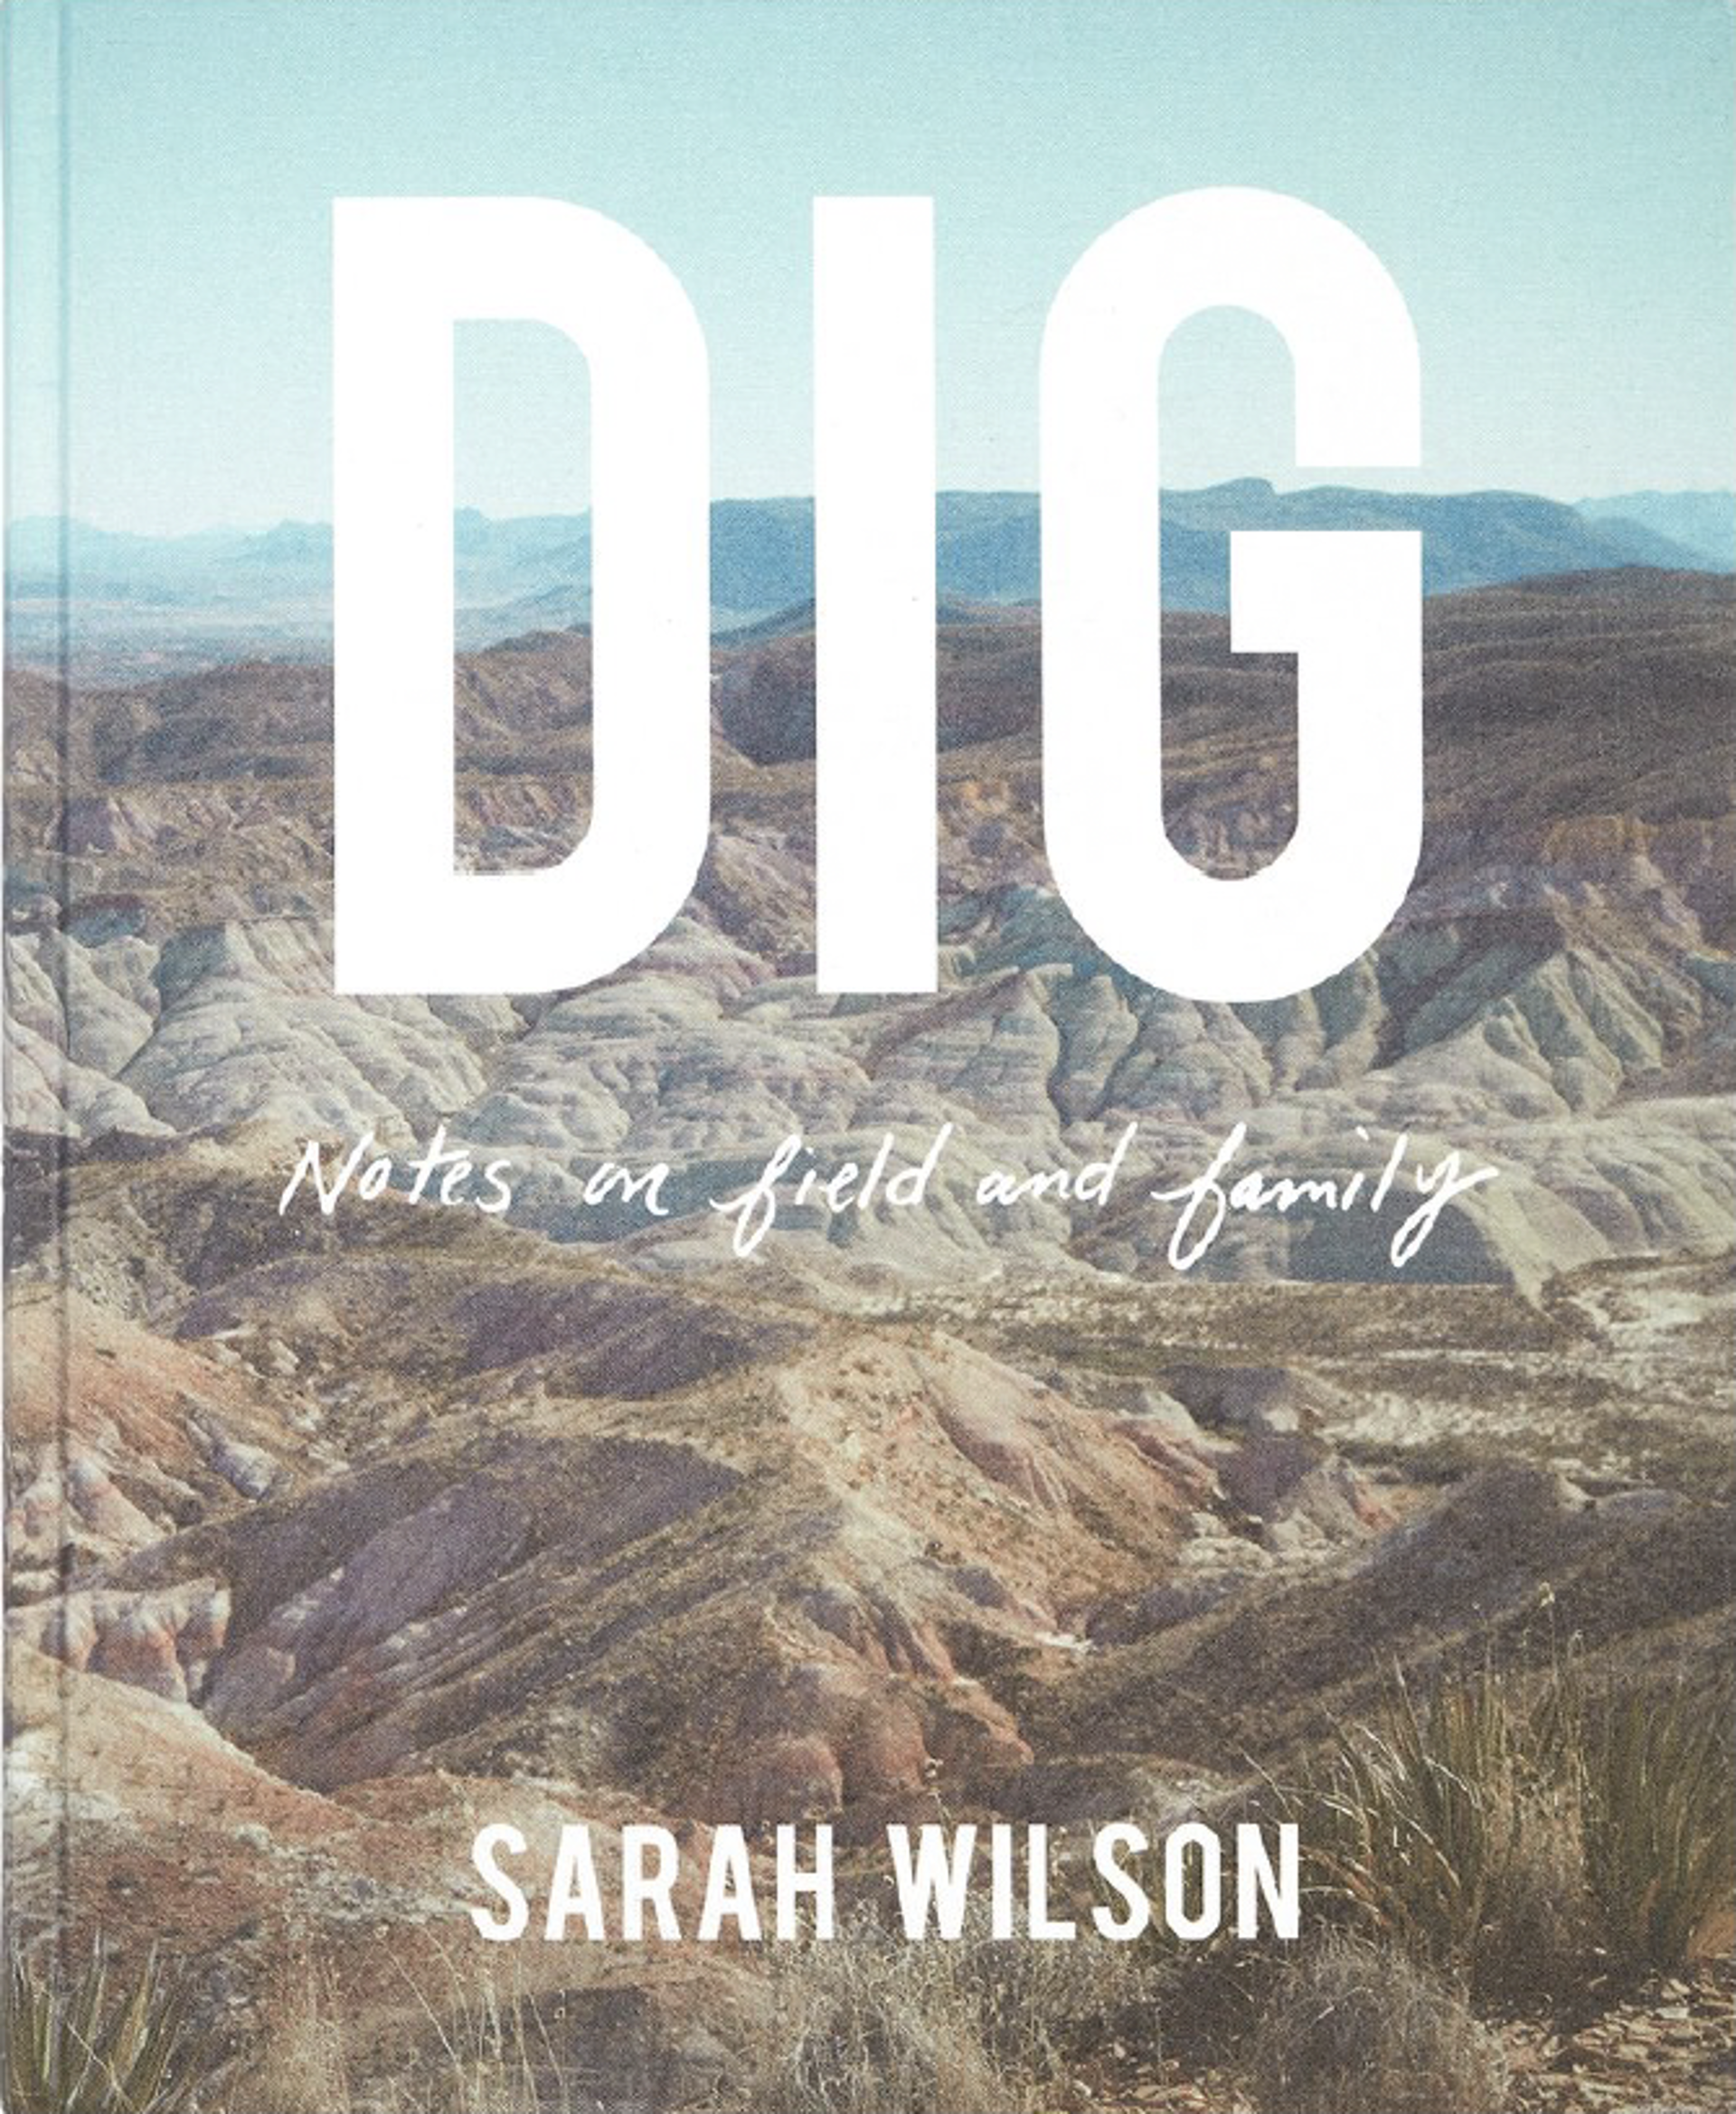 DIG: Notes on Field and Family by Sarah Wilson by Sarah Wilson